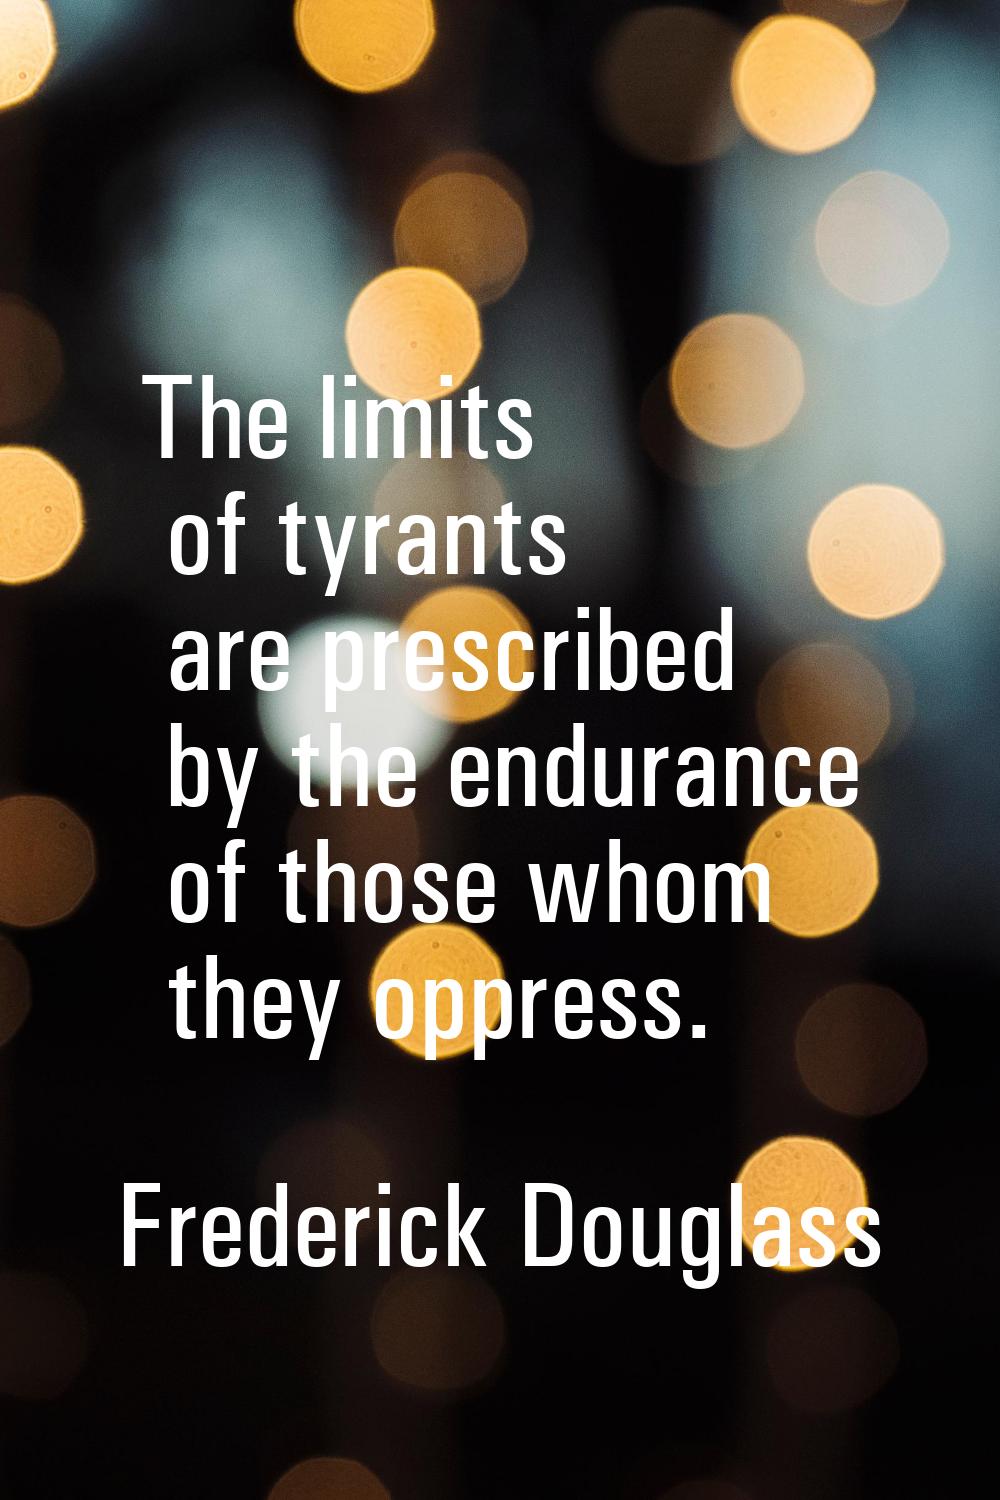 The limits of tyrants are prescribed by the endurance of those whom they oppress.